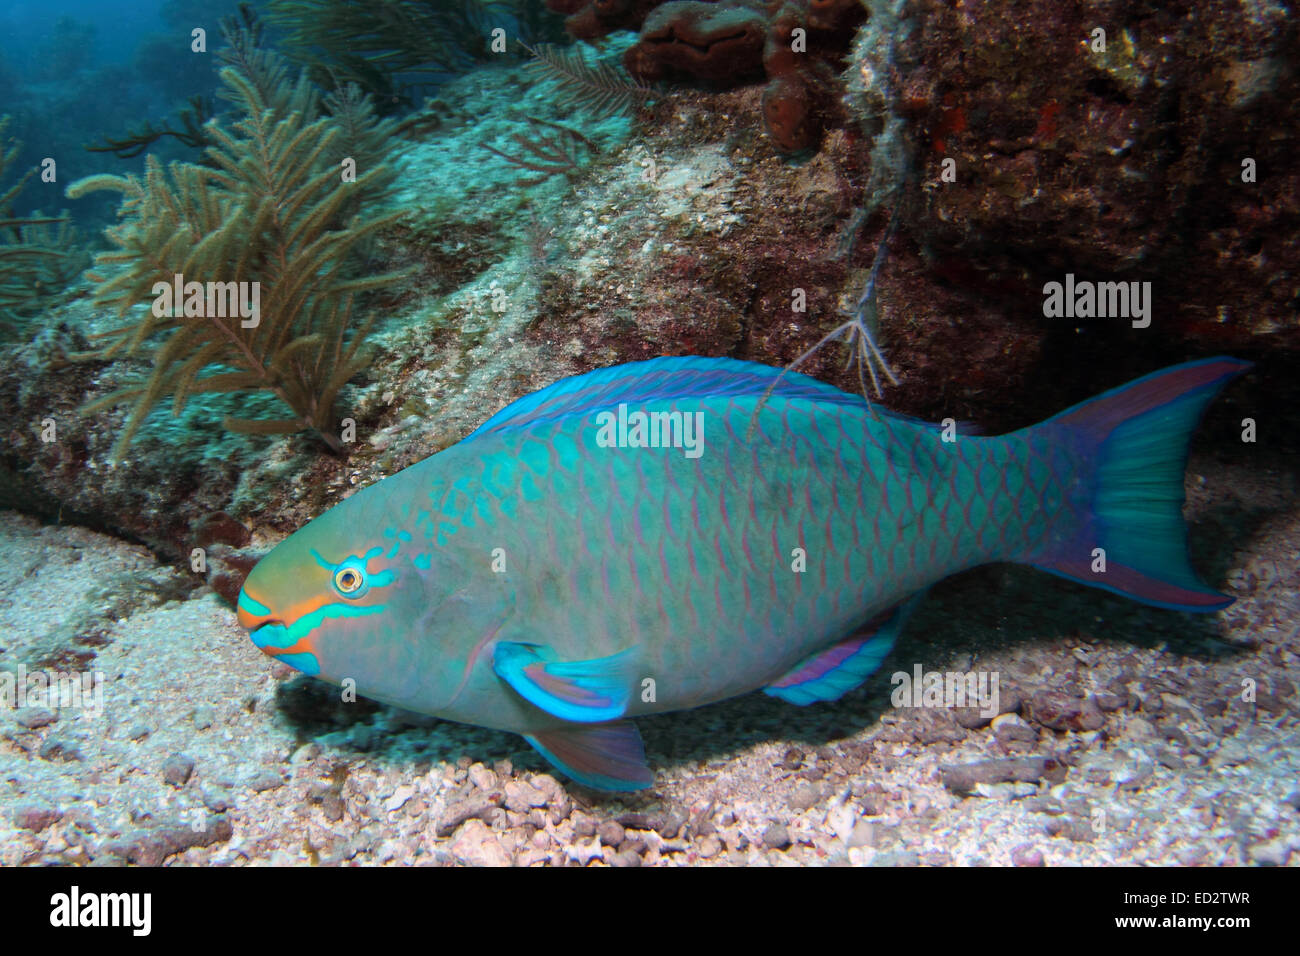 A Queen Parrotfish swims along a coral reef in the Florida Keys National Marine Sanctuary. Stock Photo